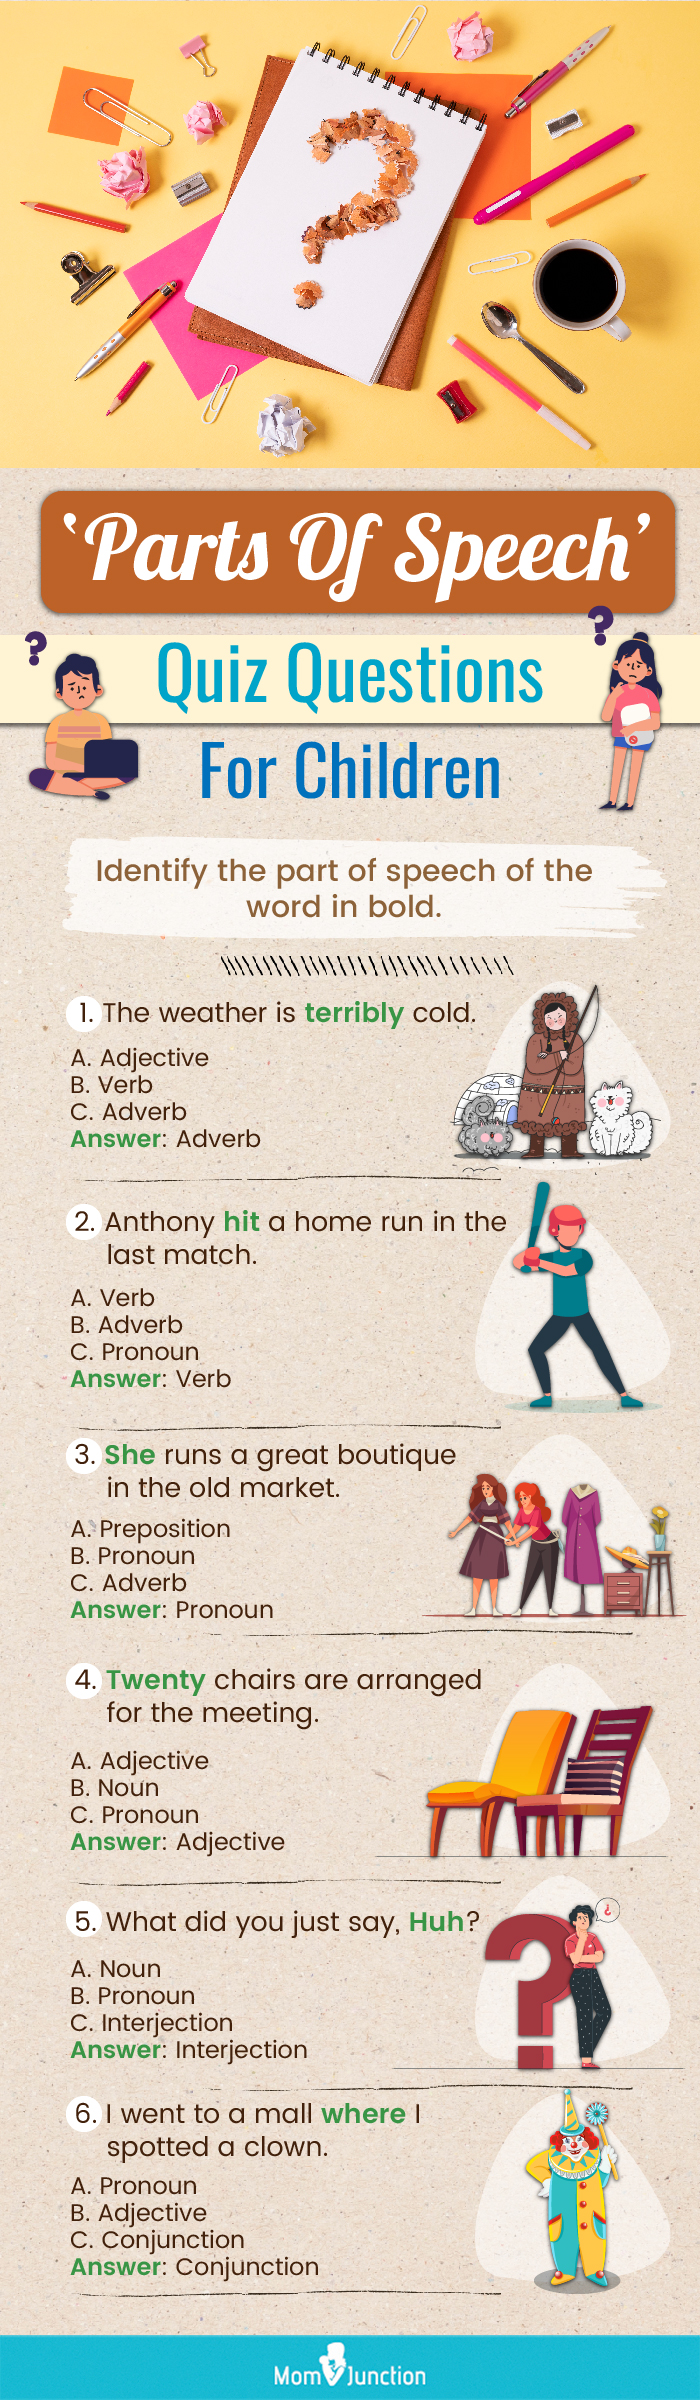 parts of speech quiz questions for children (infographic)